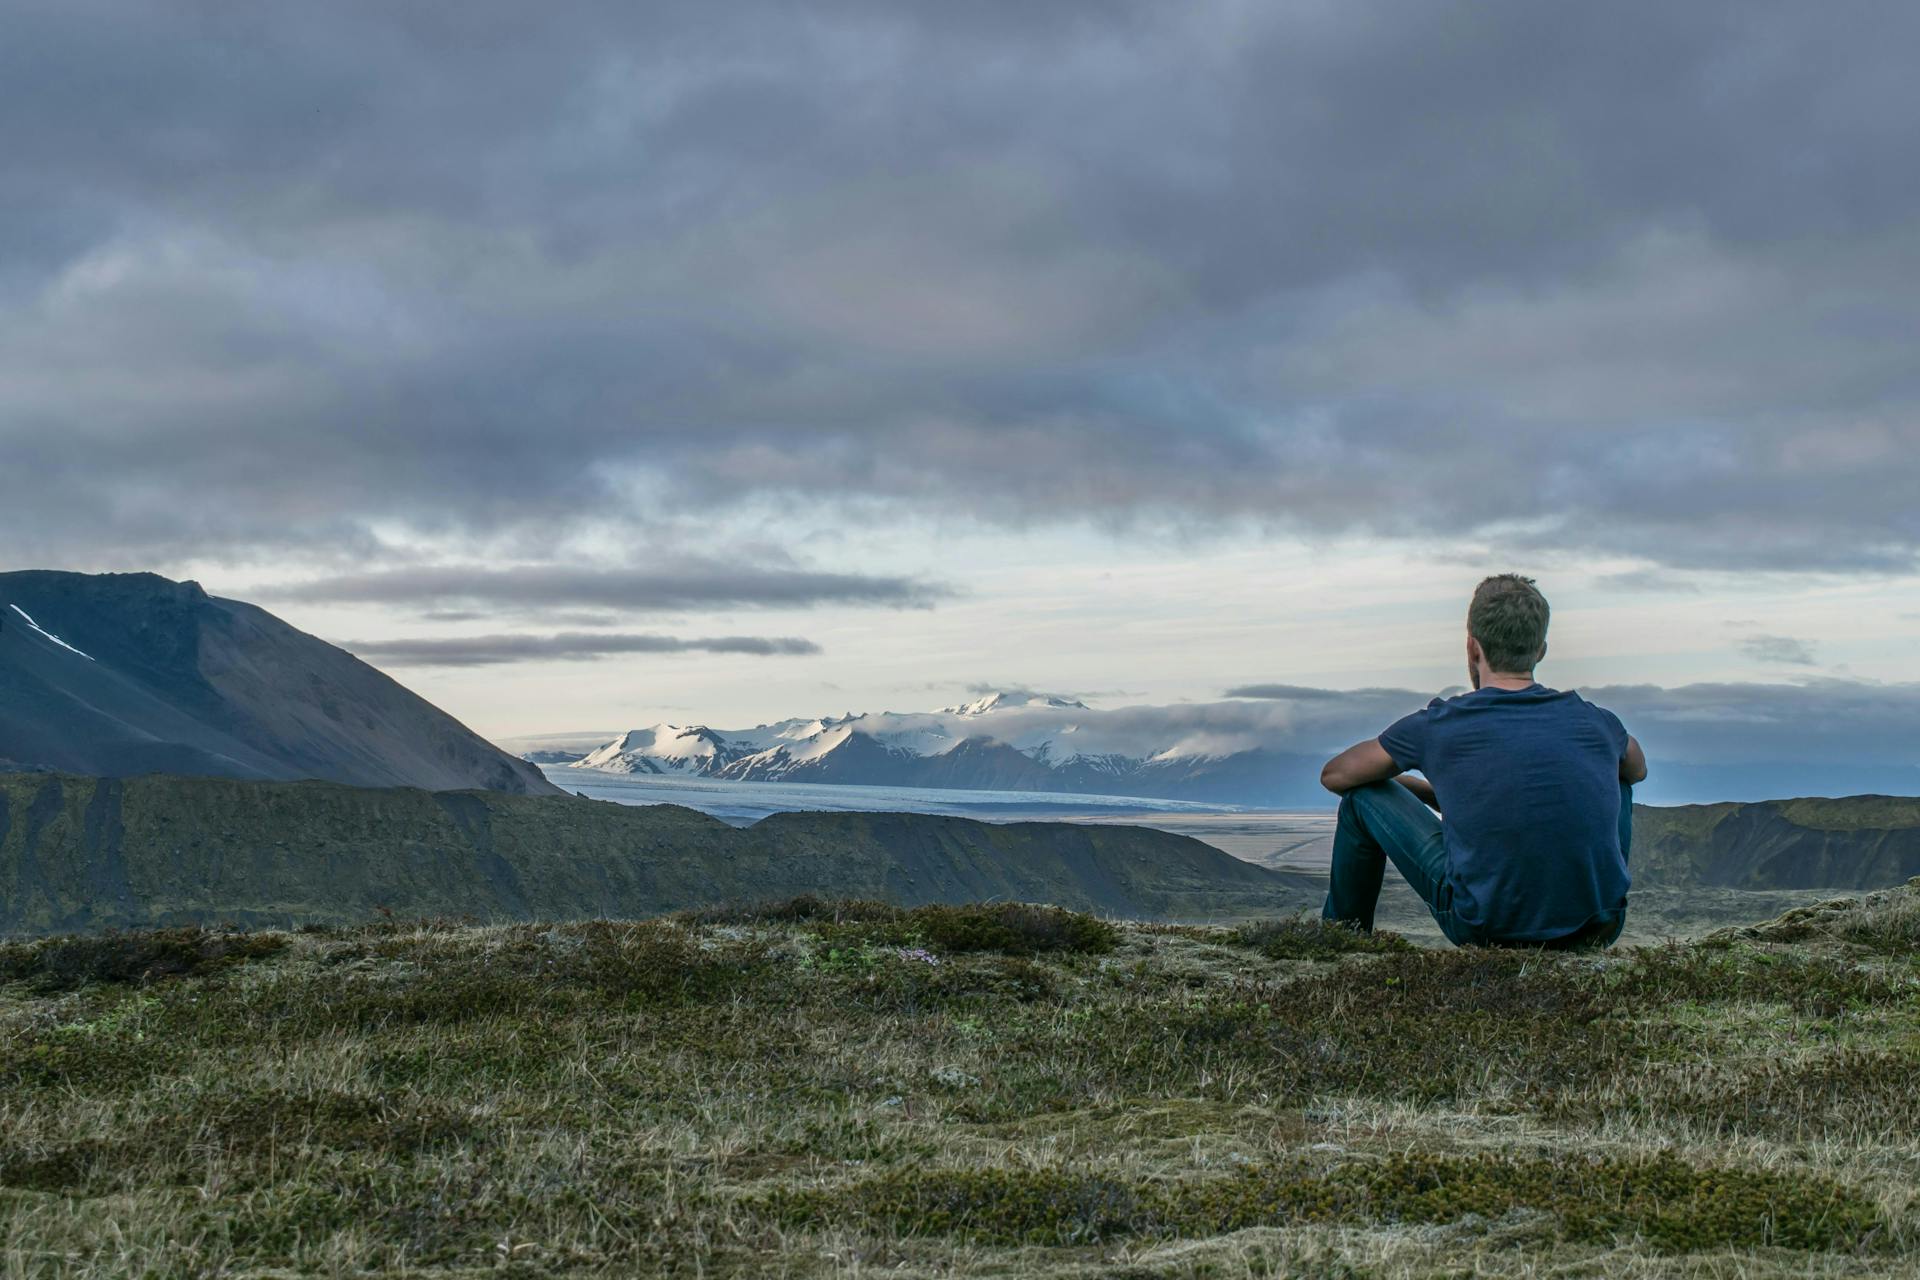 A man sitting on a hill that overlooks a fjord. Snowy mountains in the distance.